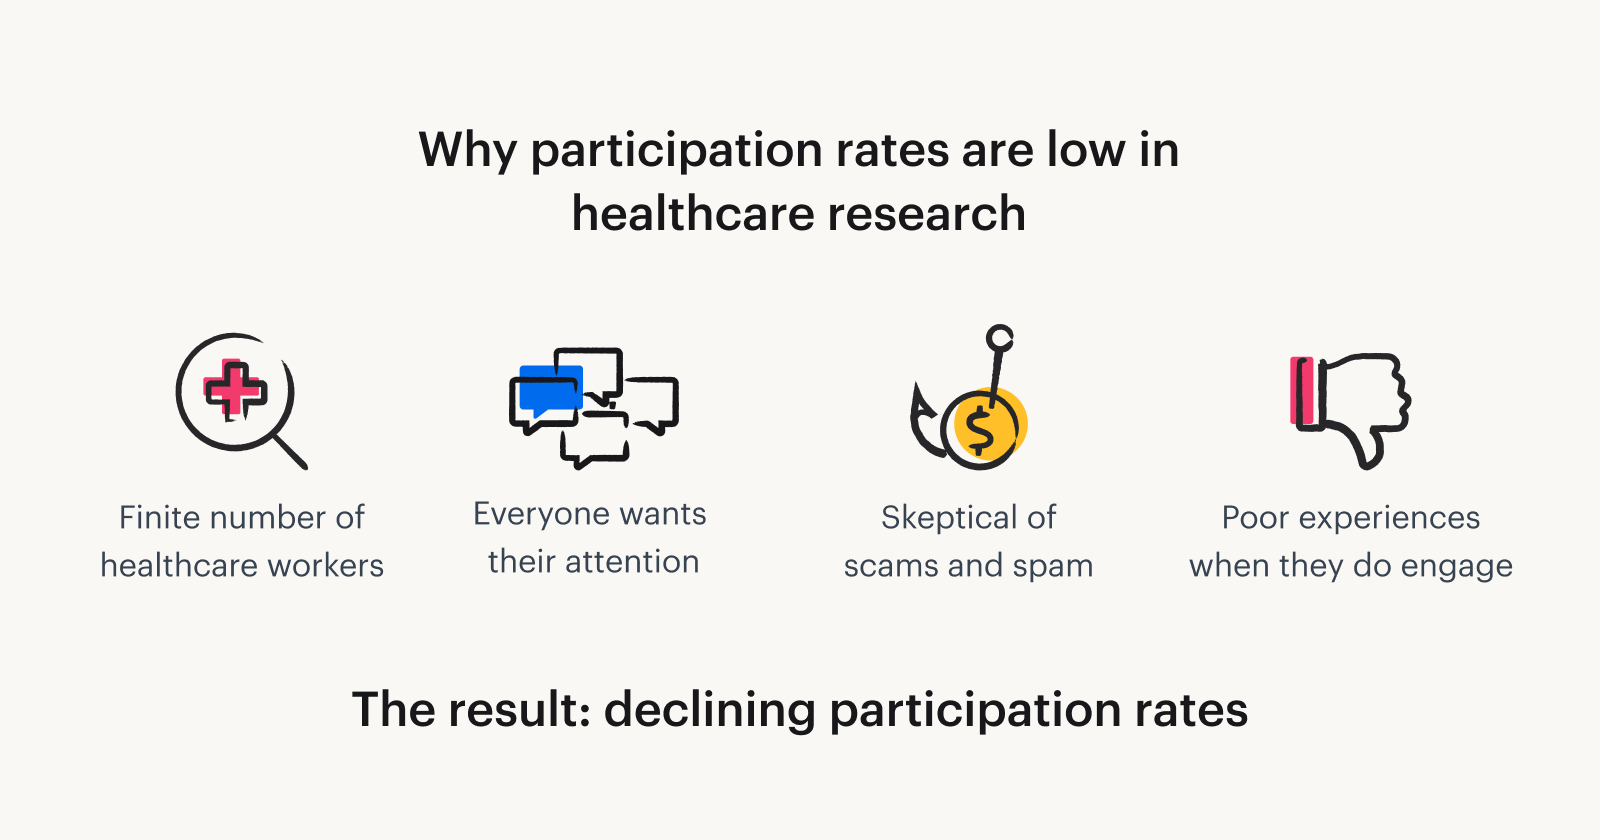 A graphic explaining why participation rates are low in healthcare research. Participation rates are low because there is a finite number of healthcare workers, everyone wants their attention, they're skeptical of scams and spam, and they have a poor experience when they do engage.